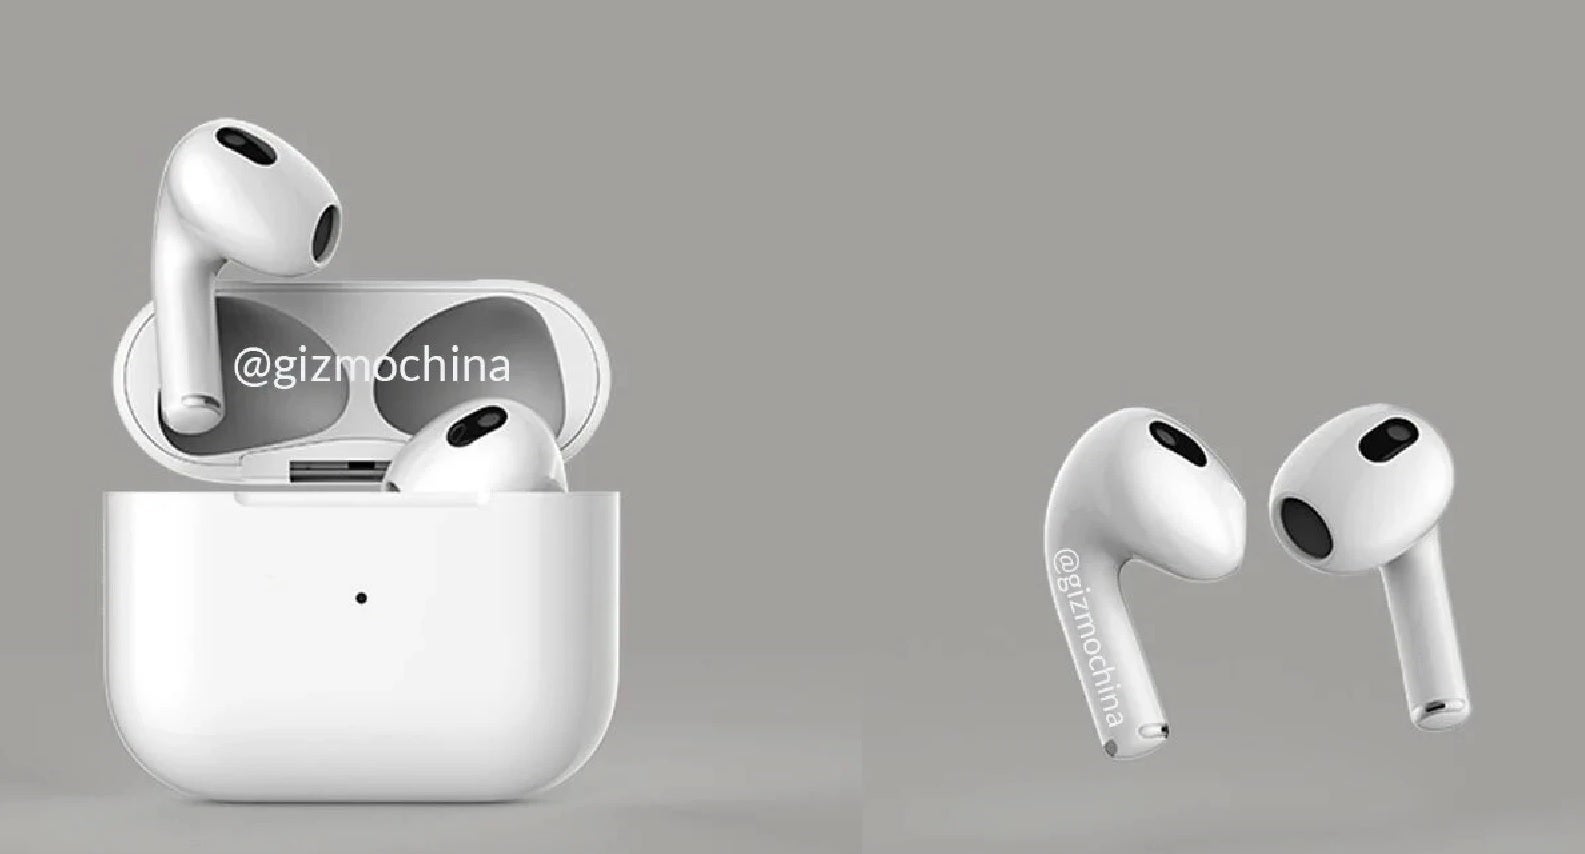 Apple was originally expected to produce the AirPods 3 in Vietnam - COVID, lack of engineers, puts the kibosh on Apple and Google&#039;s plans to move production to Vietnam